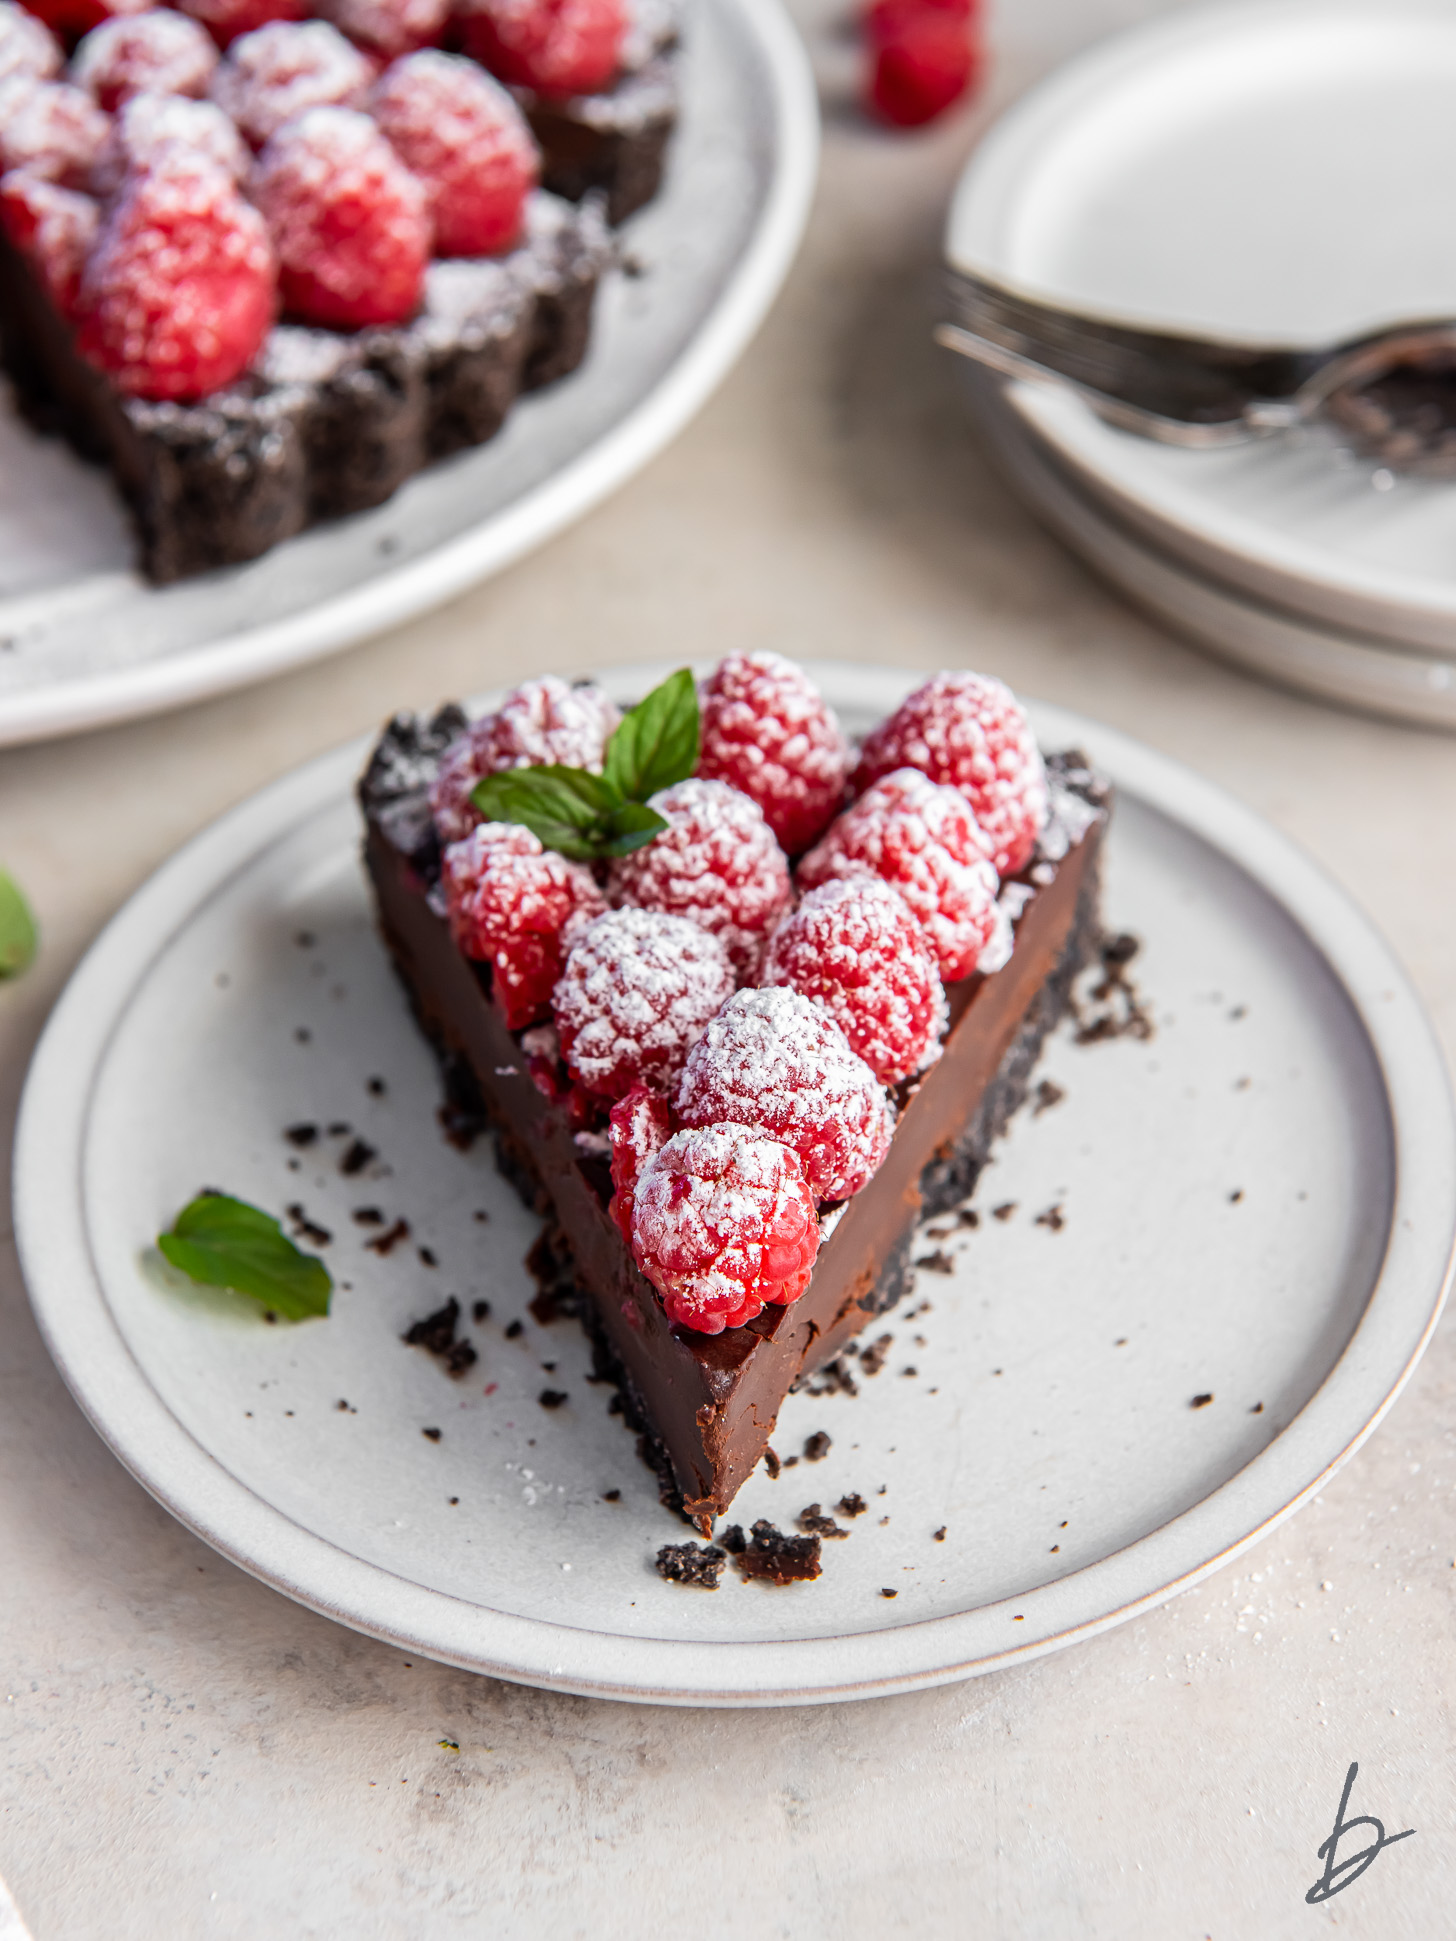 slice of chocolate raspberry tart with a sprig of mint leaves on a plate.